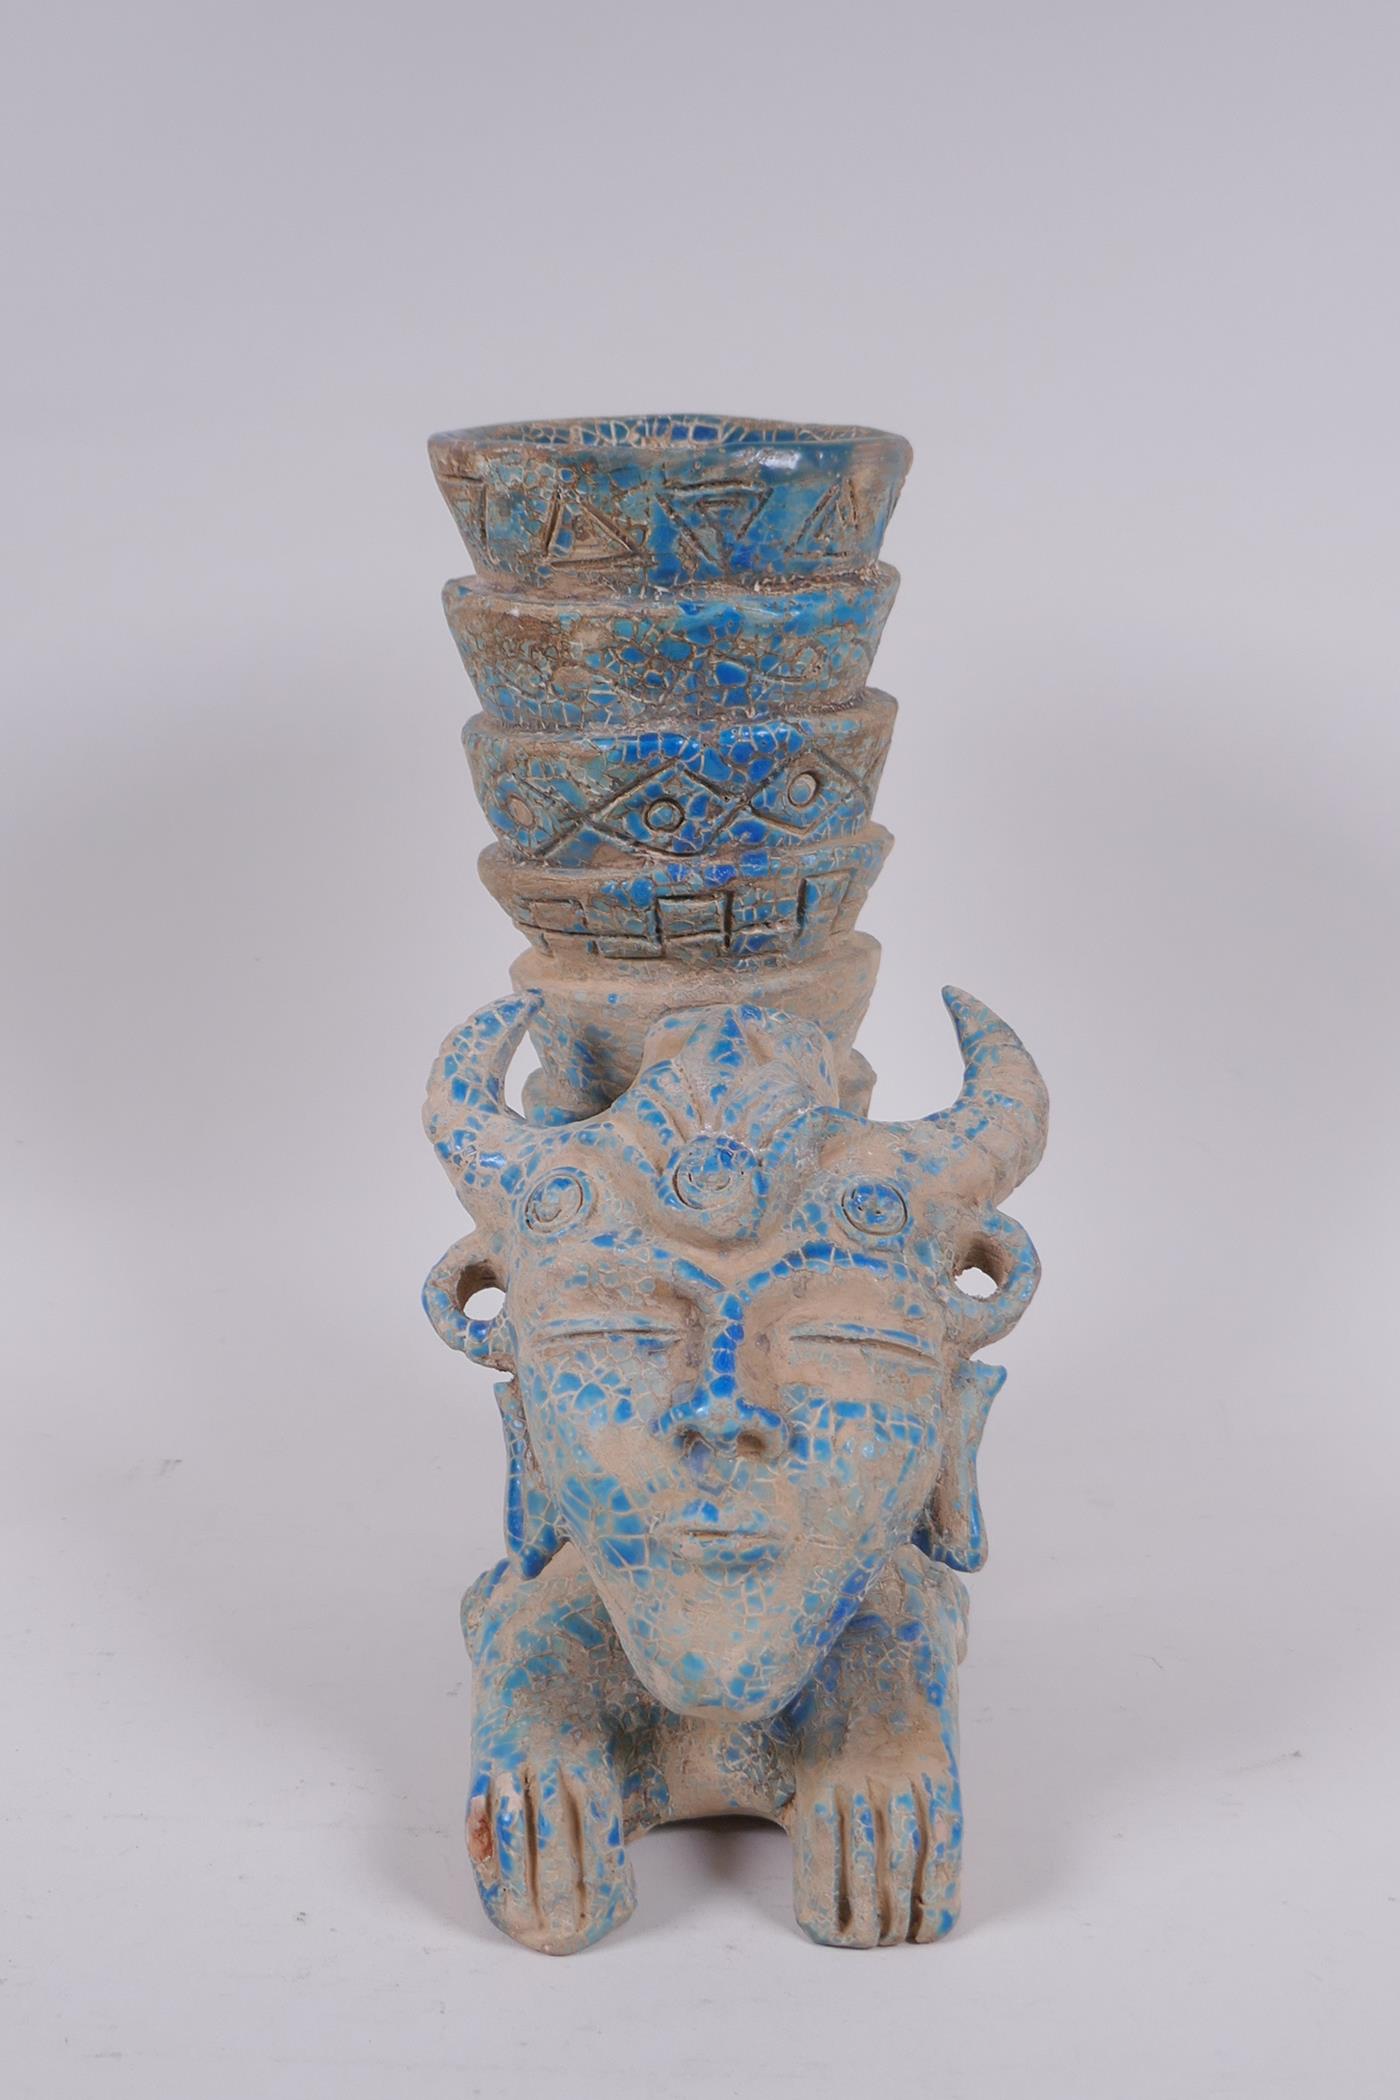 An Islamic earthenware mask vase with turquoise crackle glaze, 25cm high - Image 2 of 5